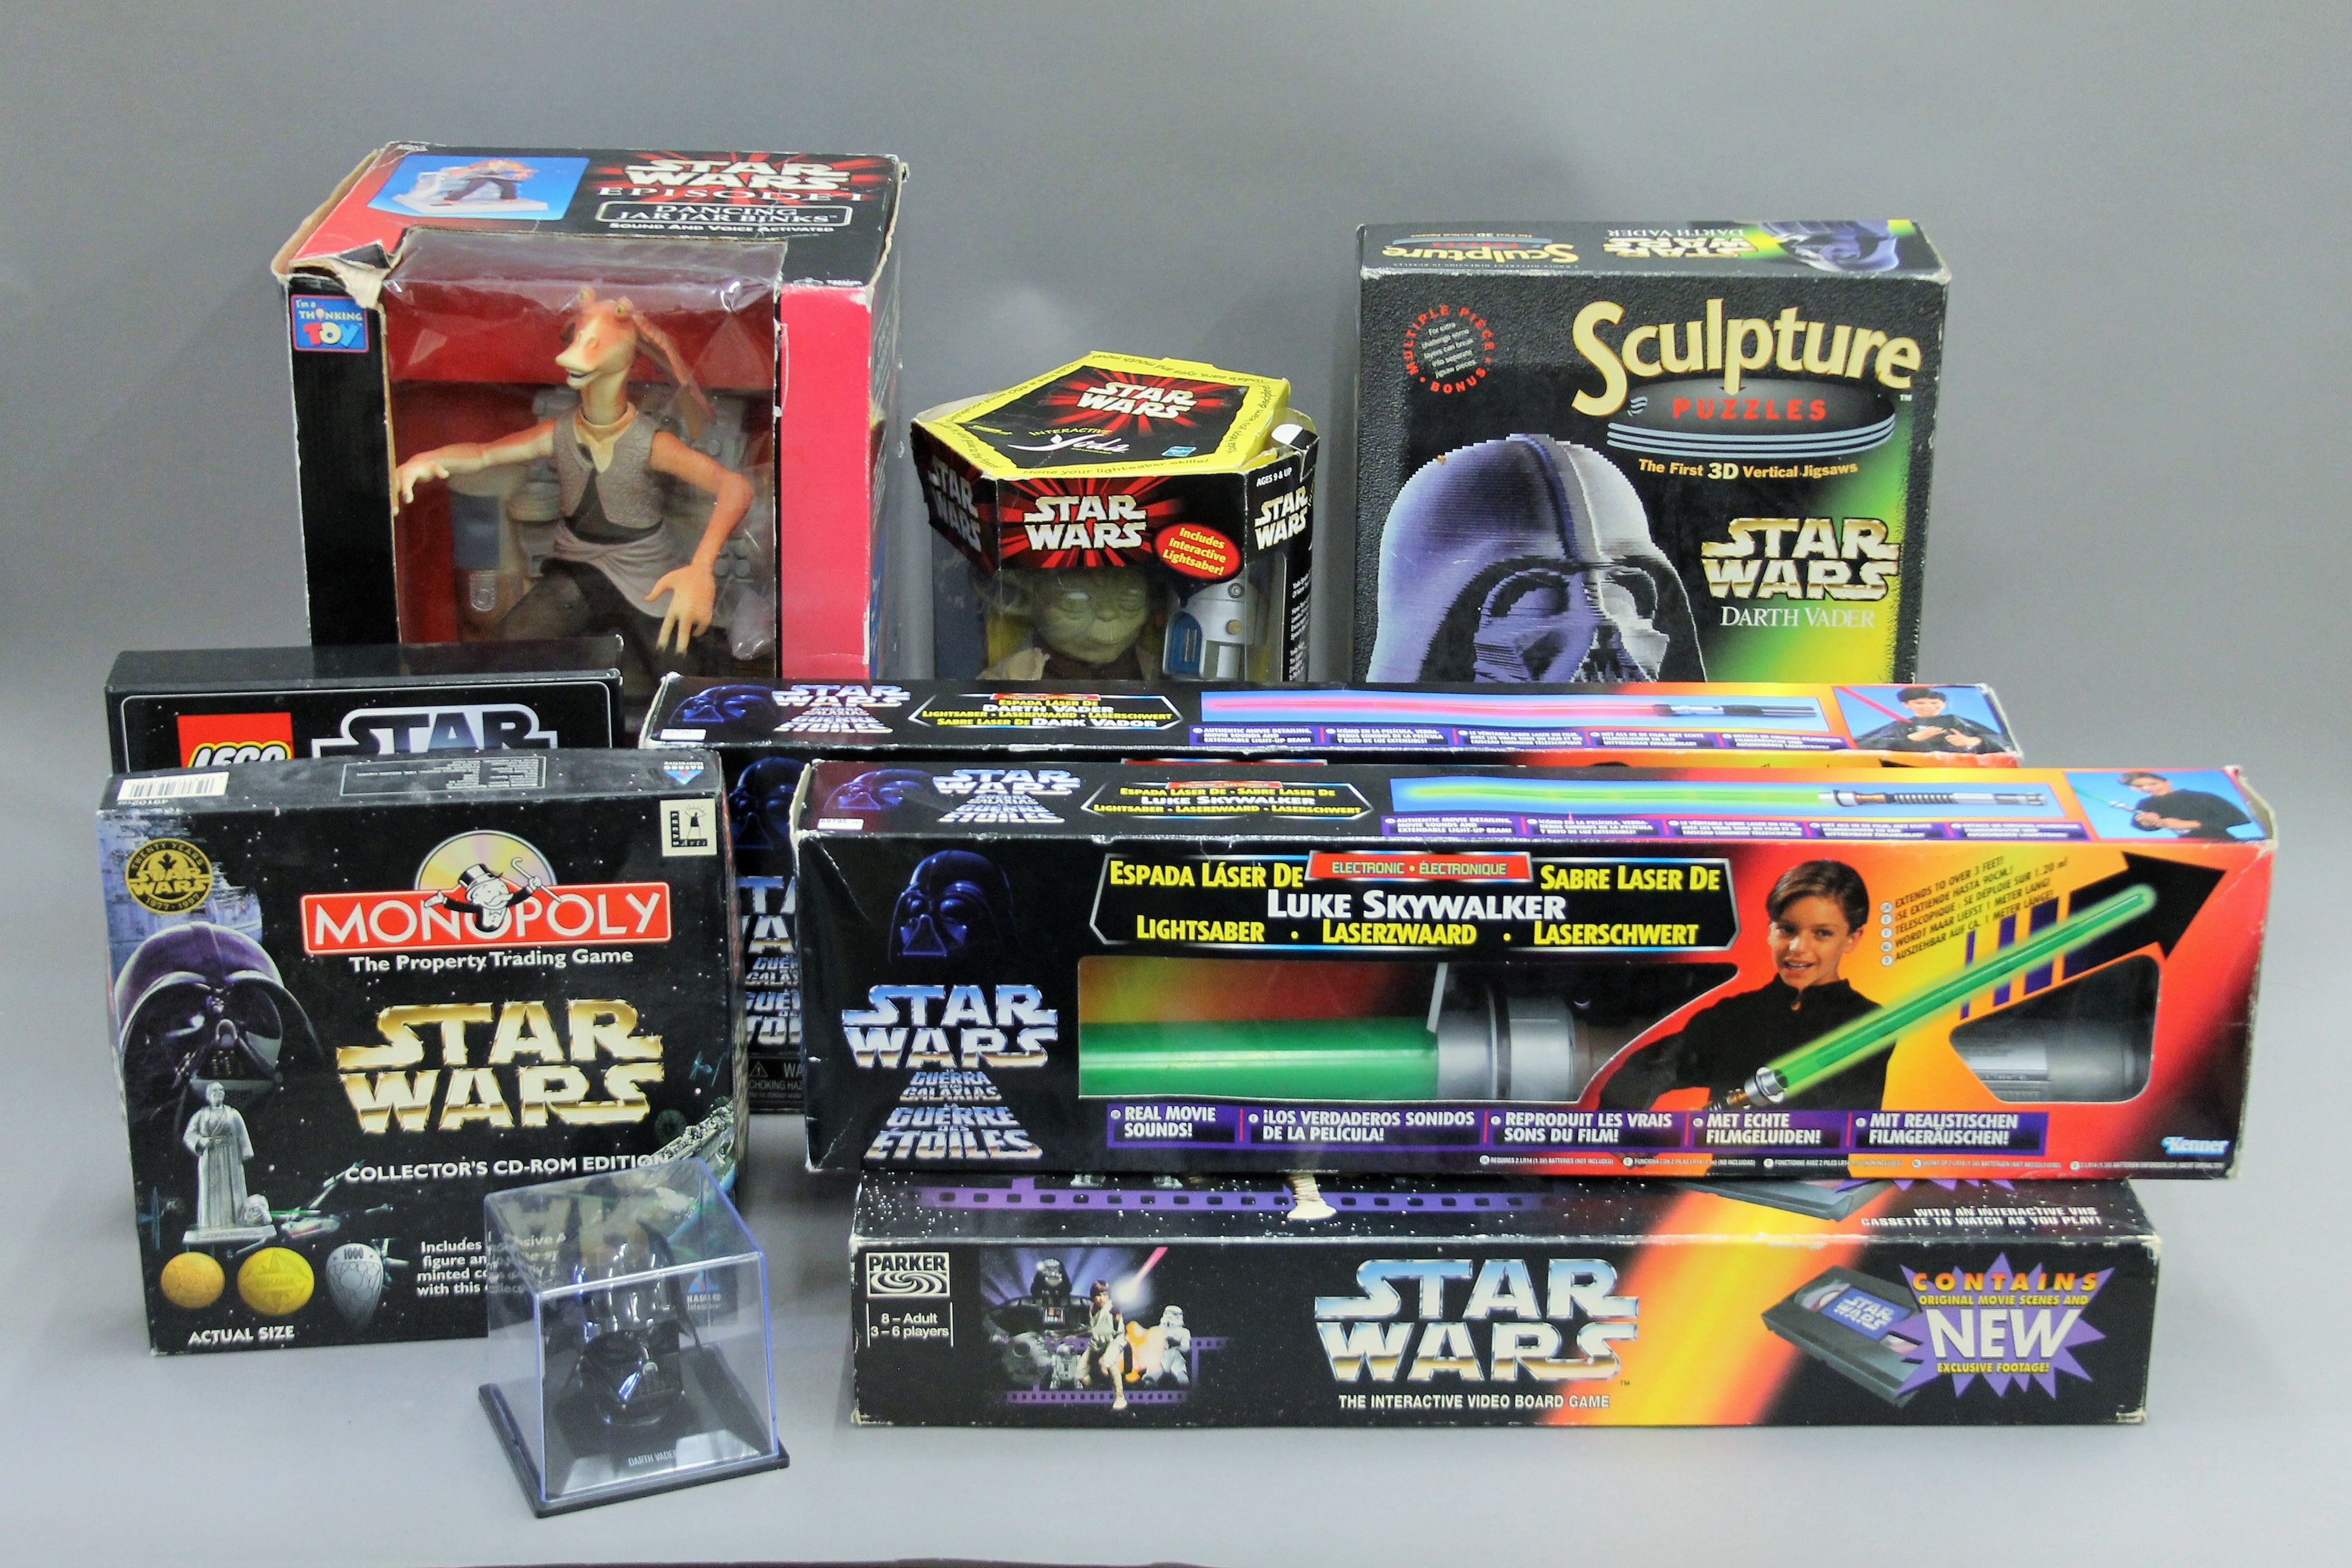 A box of Star Wars toys.